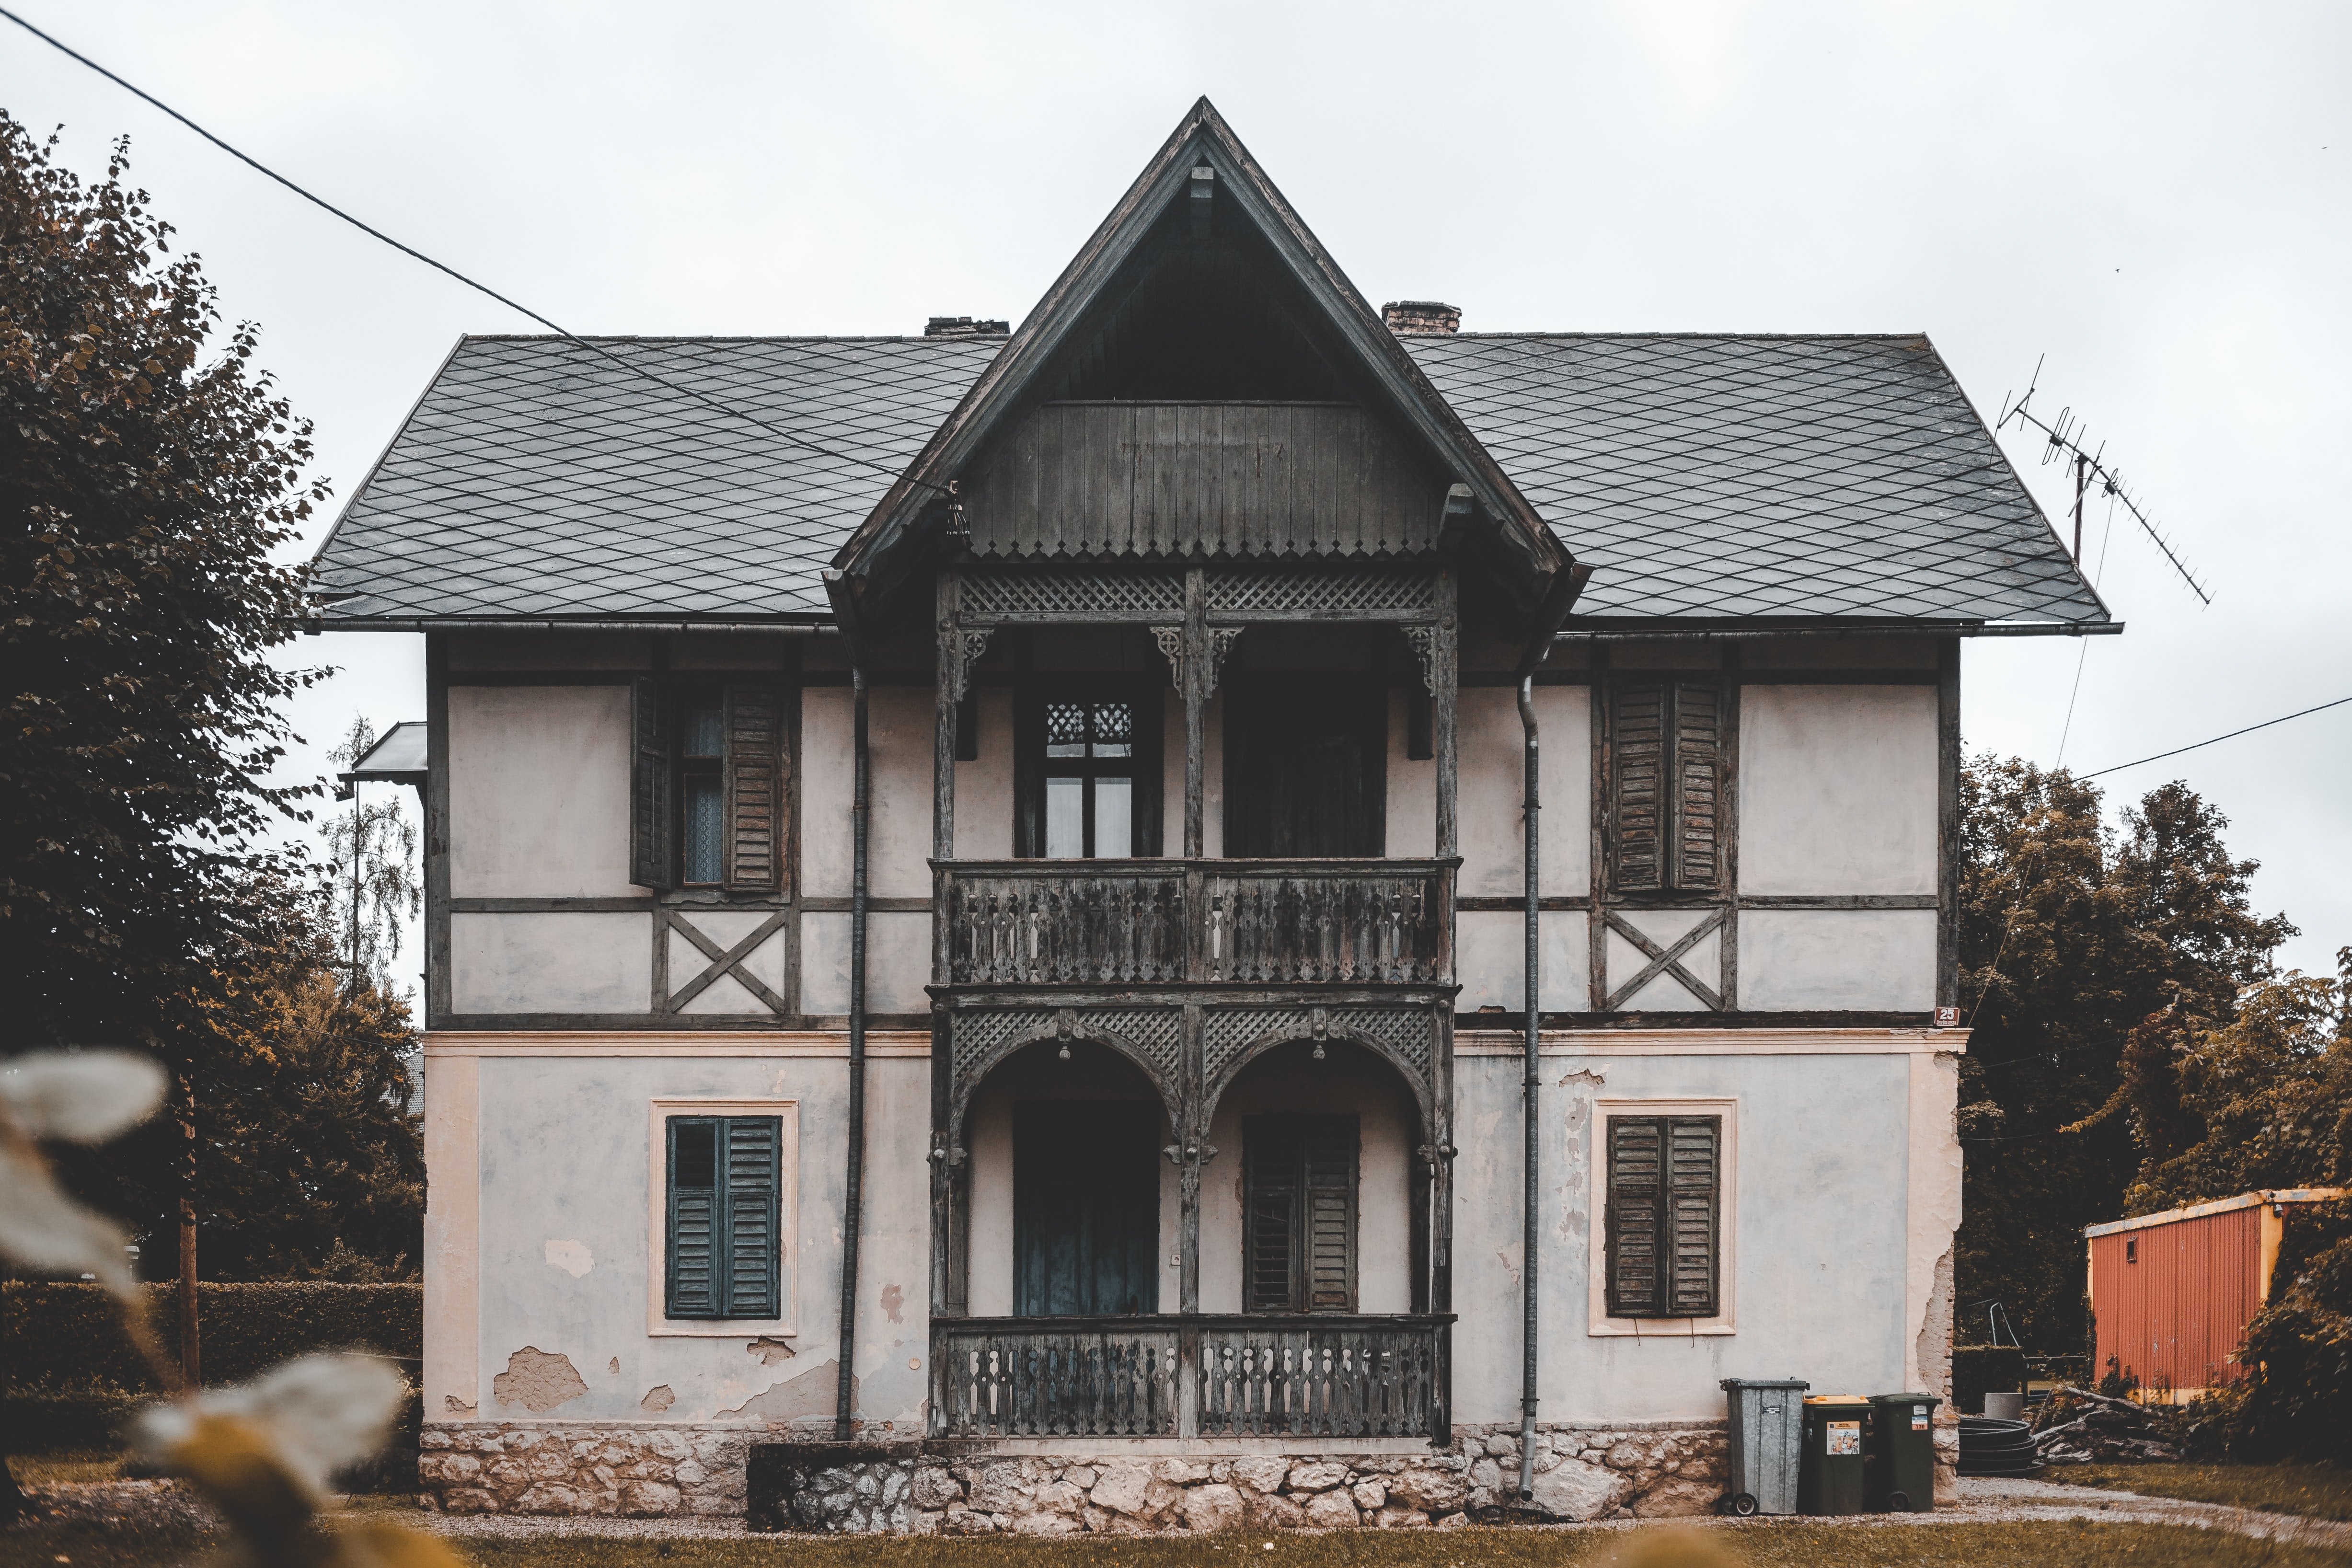 Adam seemed to recognize the old house. | Source: Unsplash